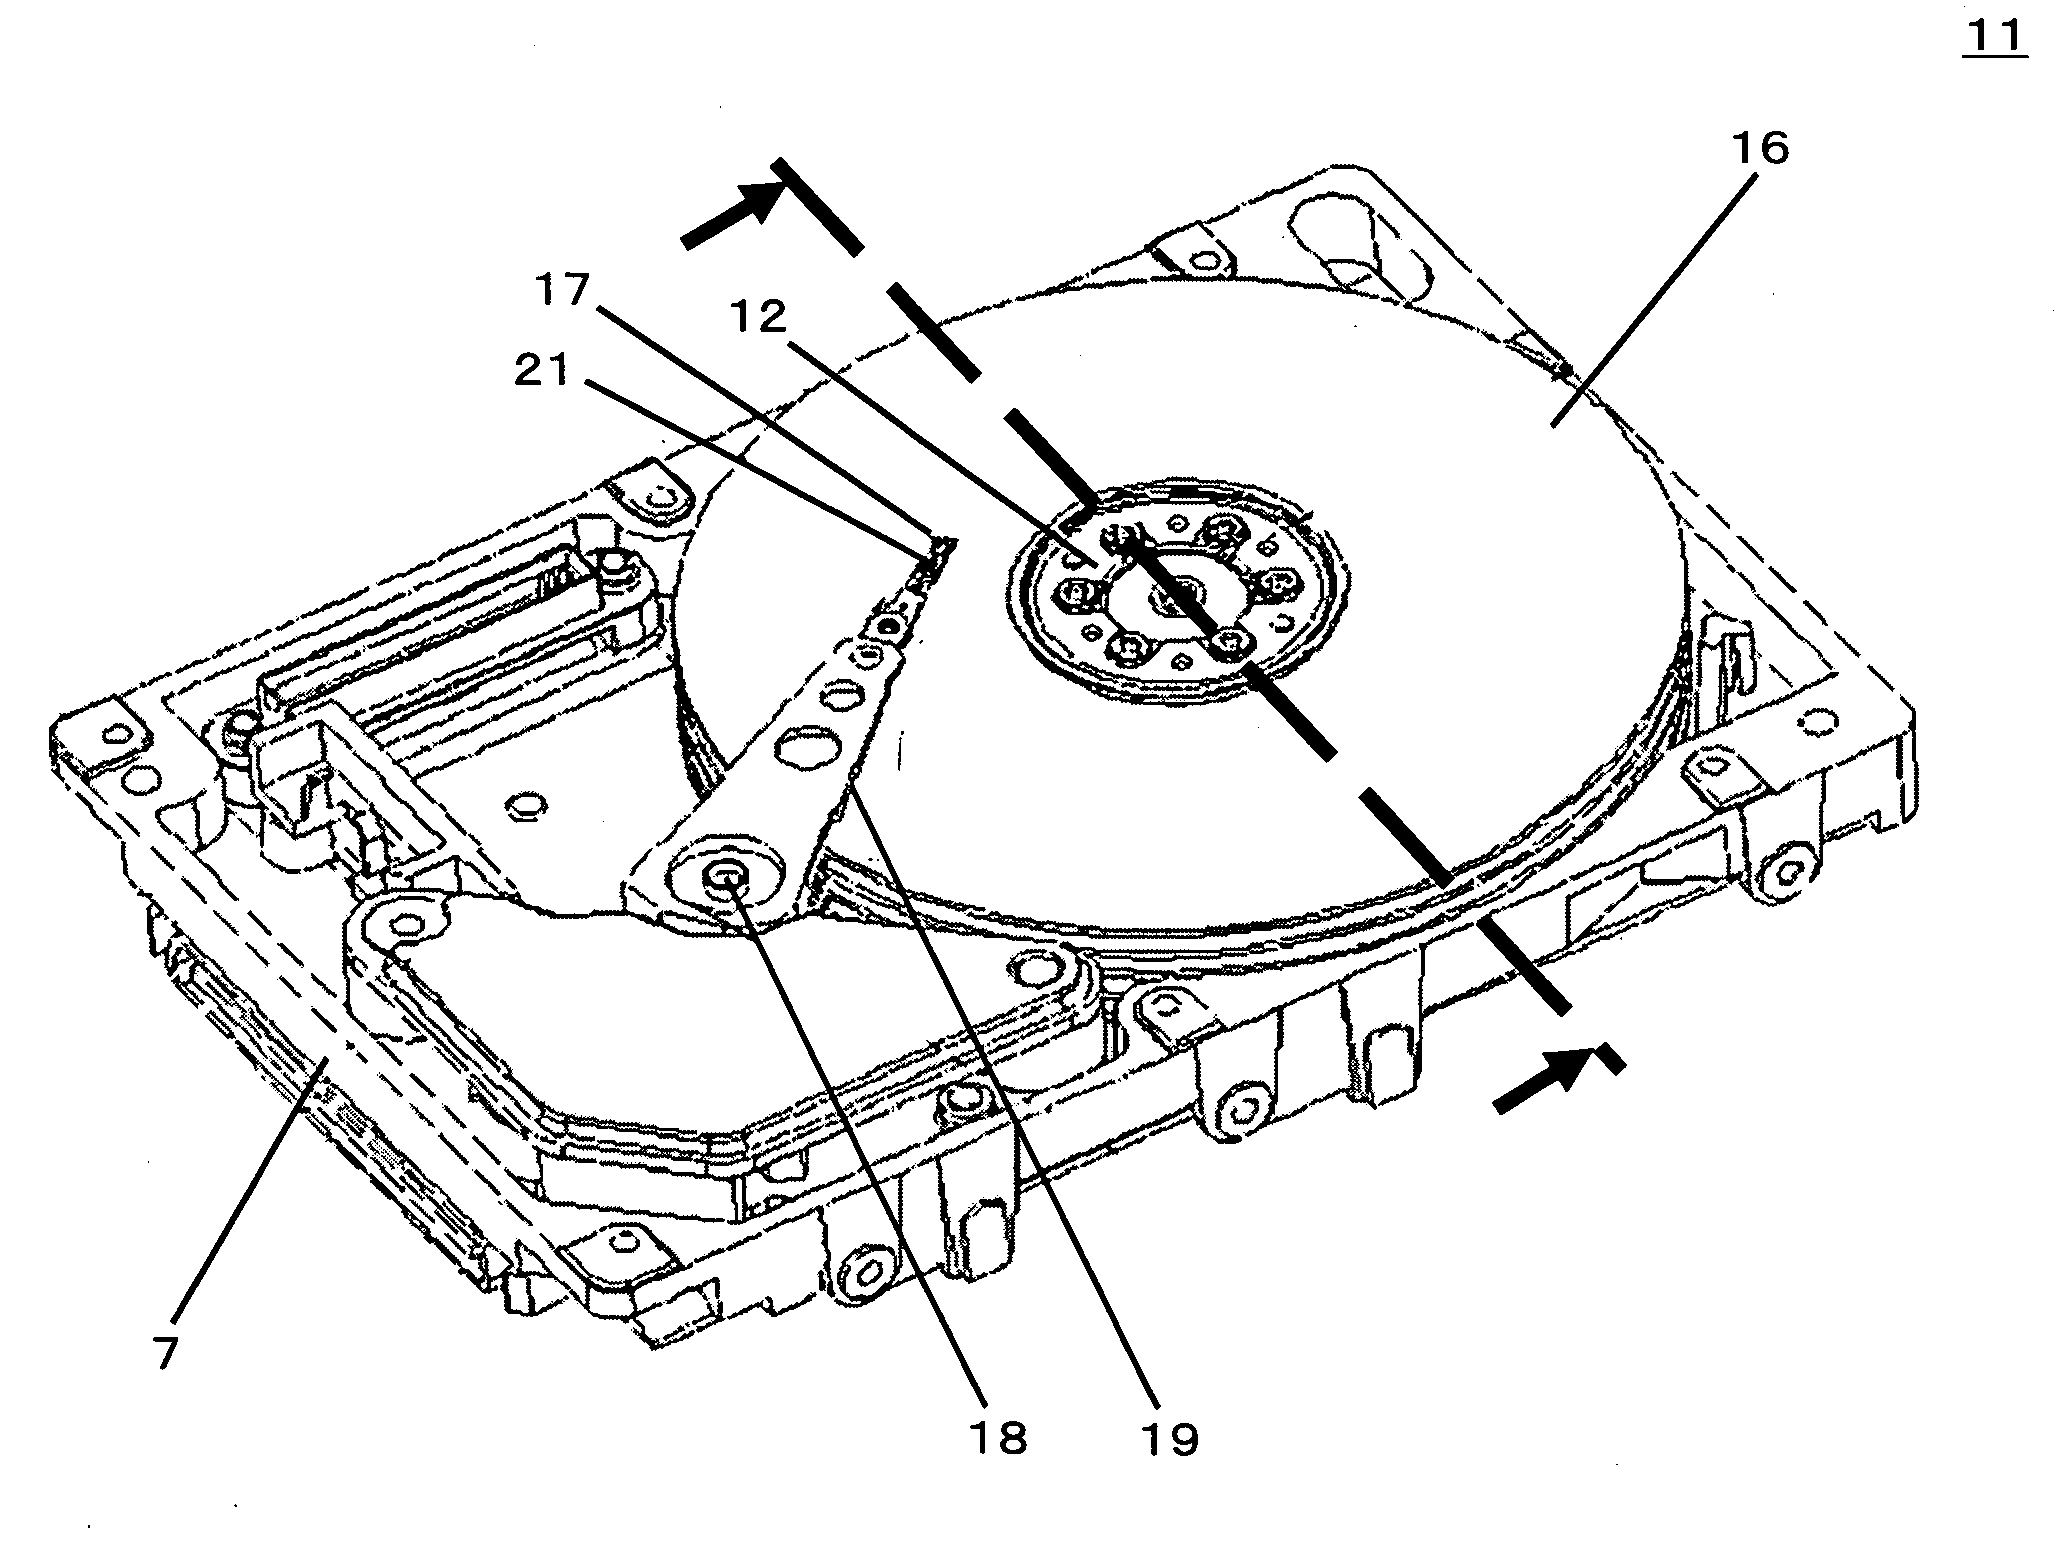 Magnetic disk device